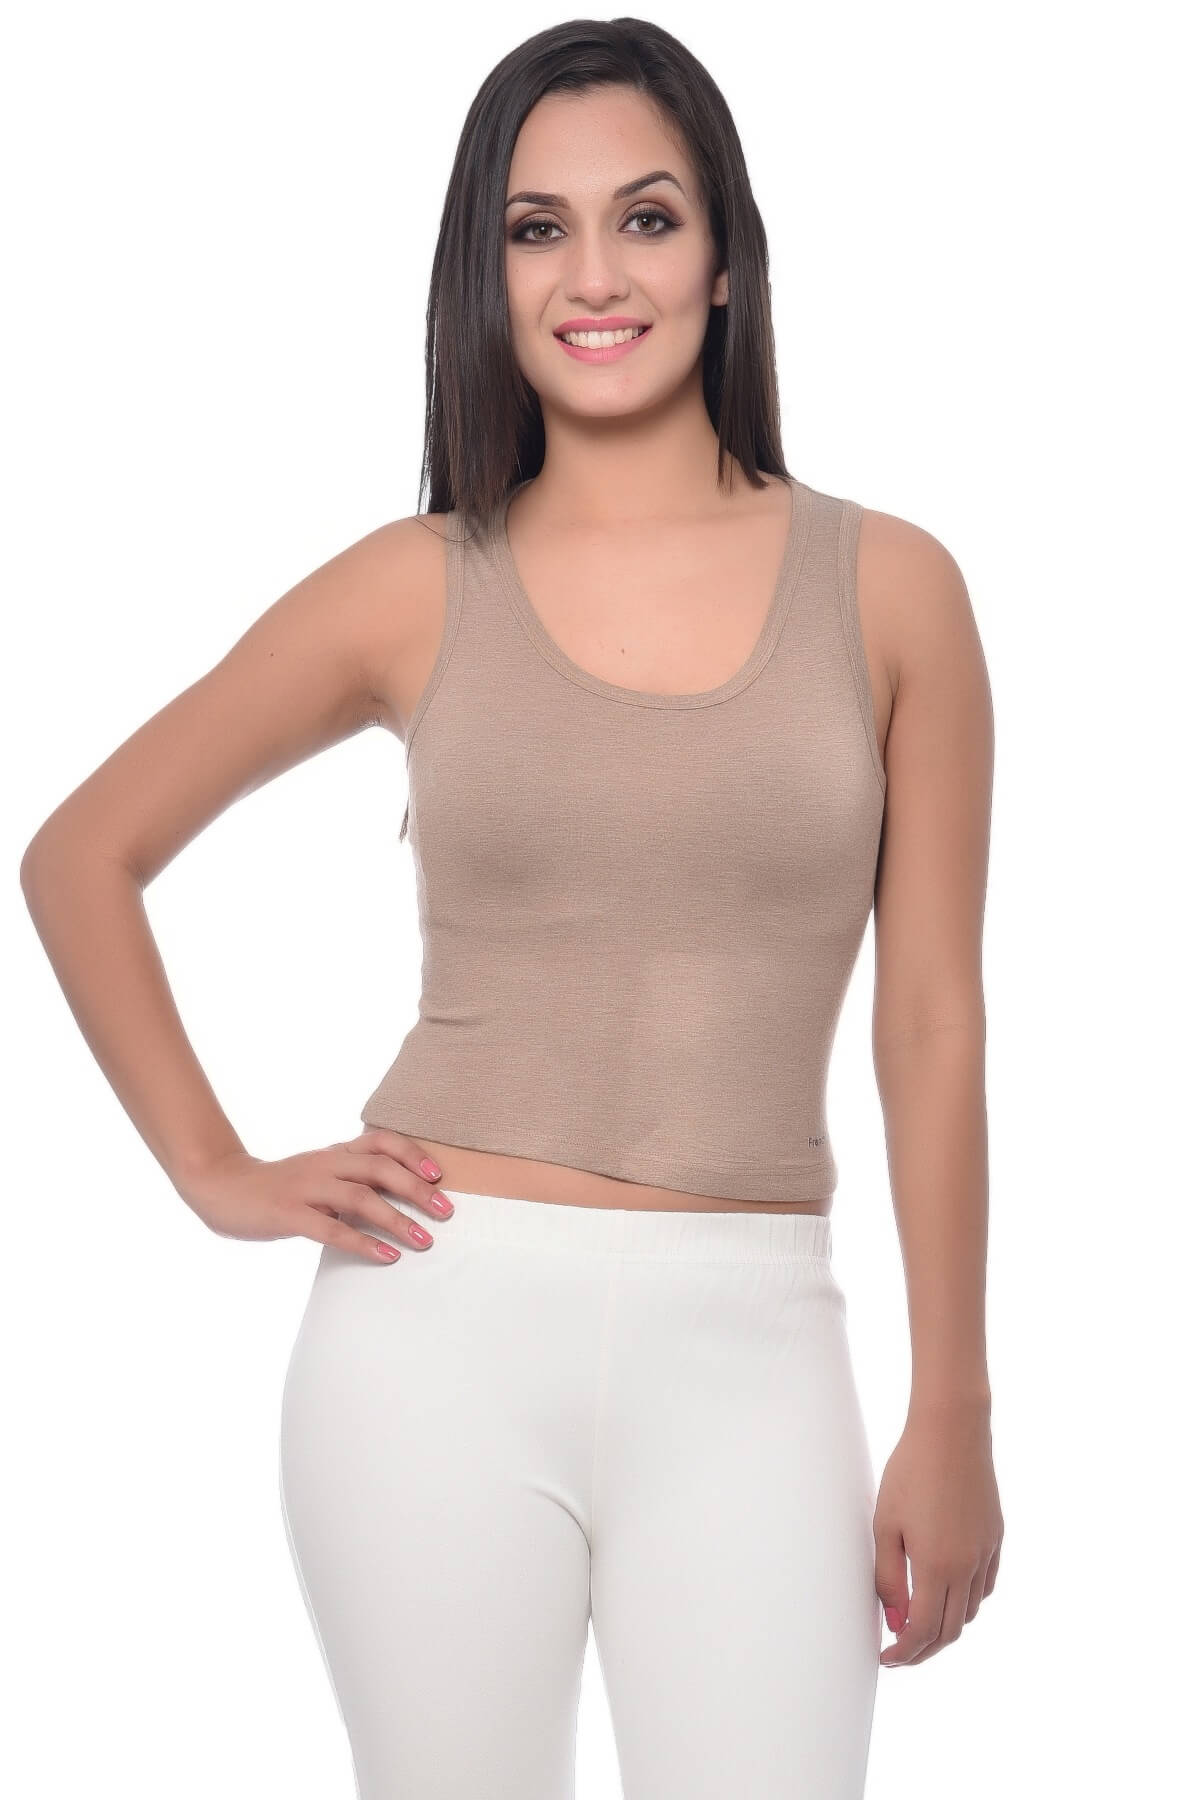 https://frenchtrendz.com/images/thumbs/0006464_frenchtrendz-viscose-spandex-camel-crop-top.jpeg